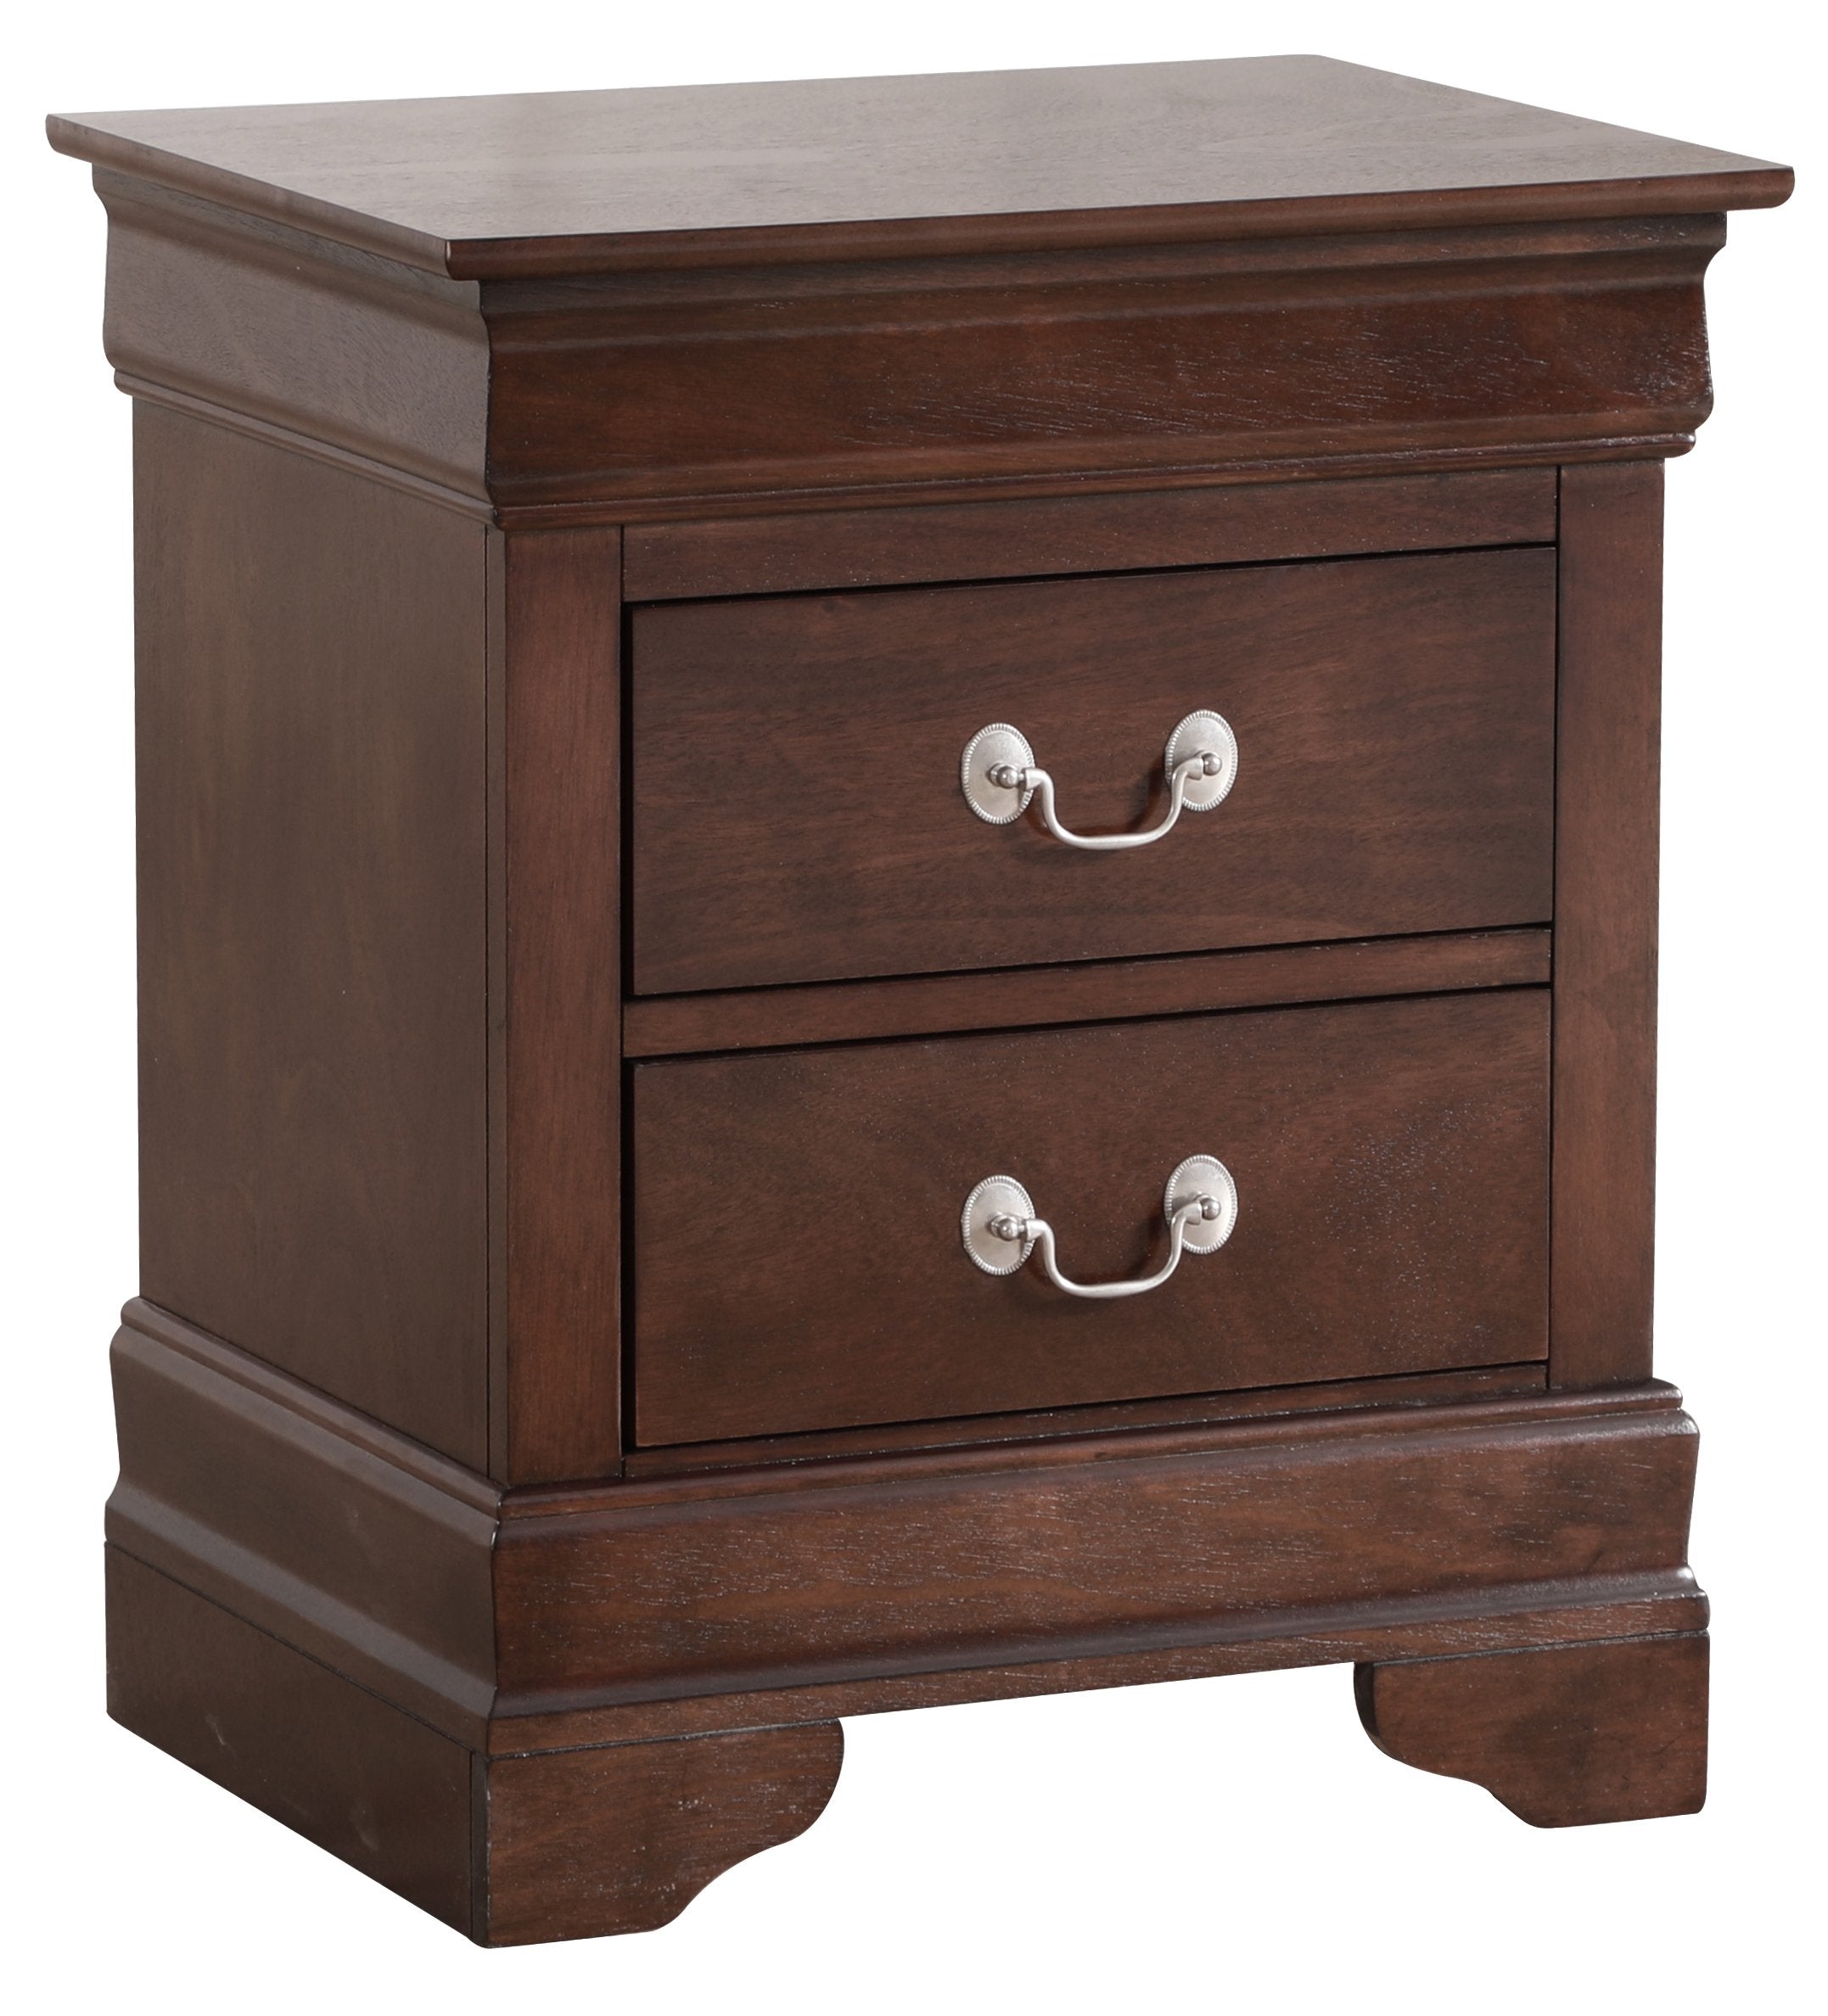 Everly Cappuccino 2 Drawers Nightstand